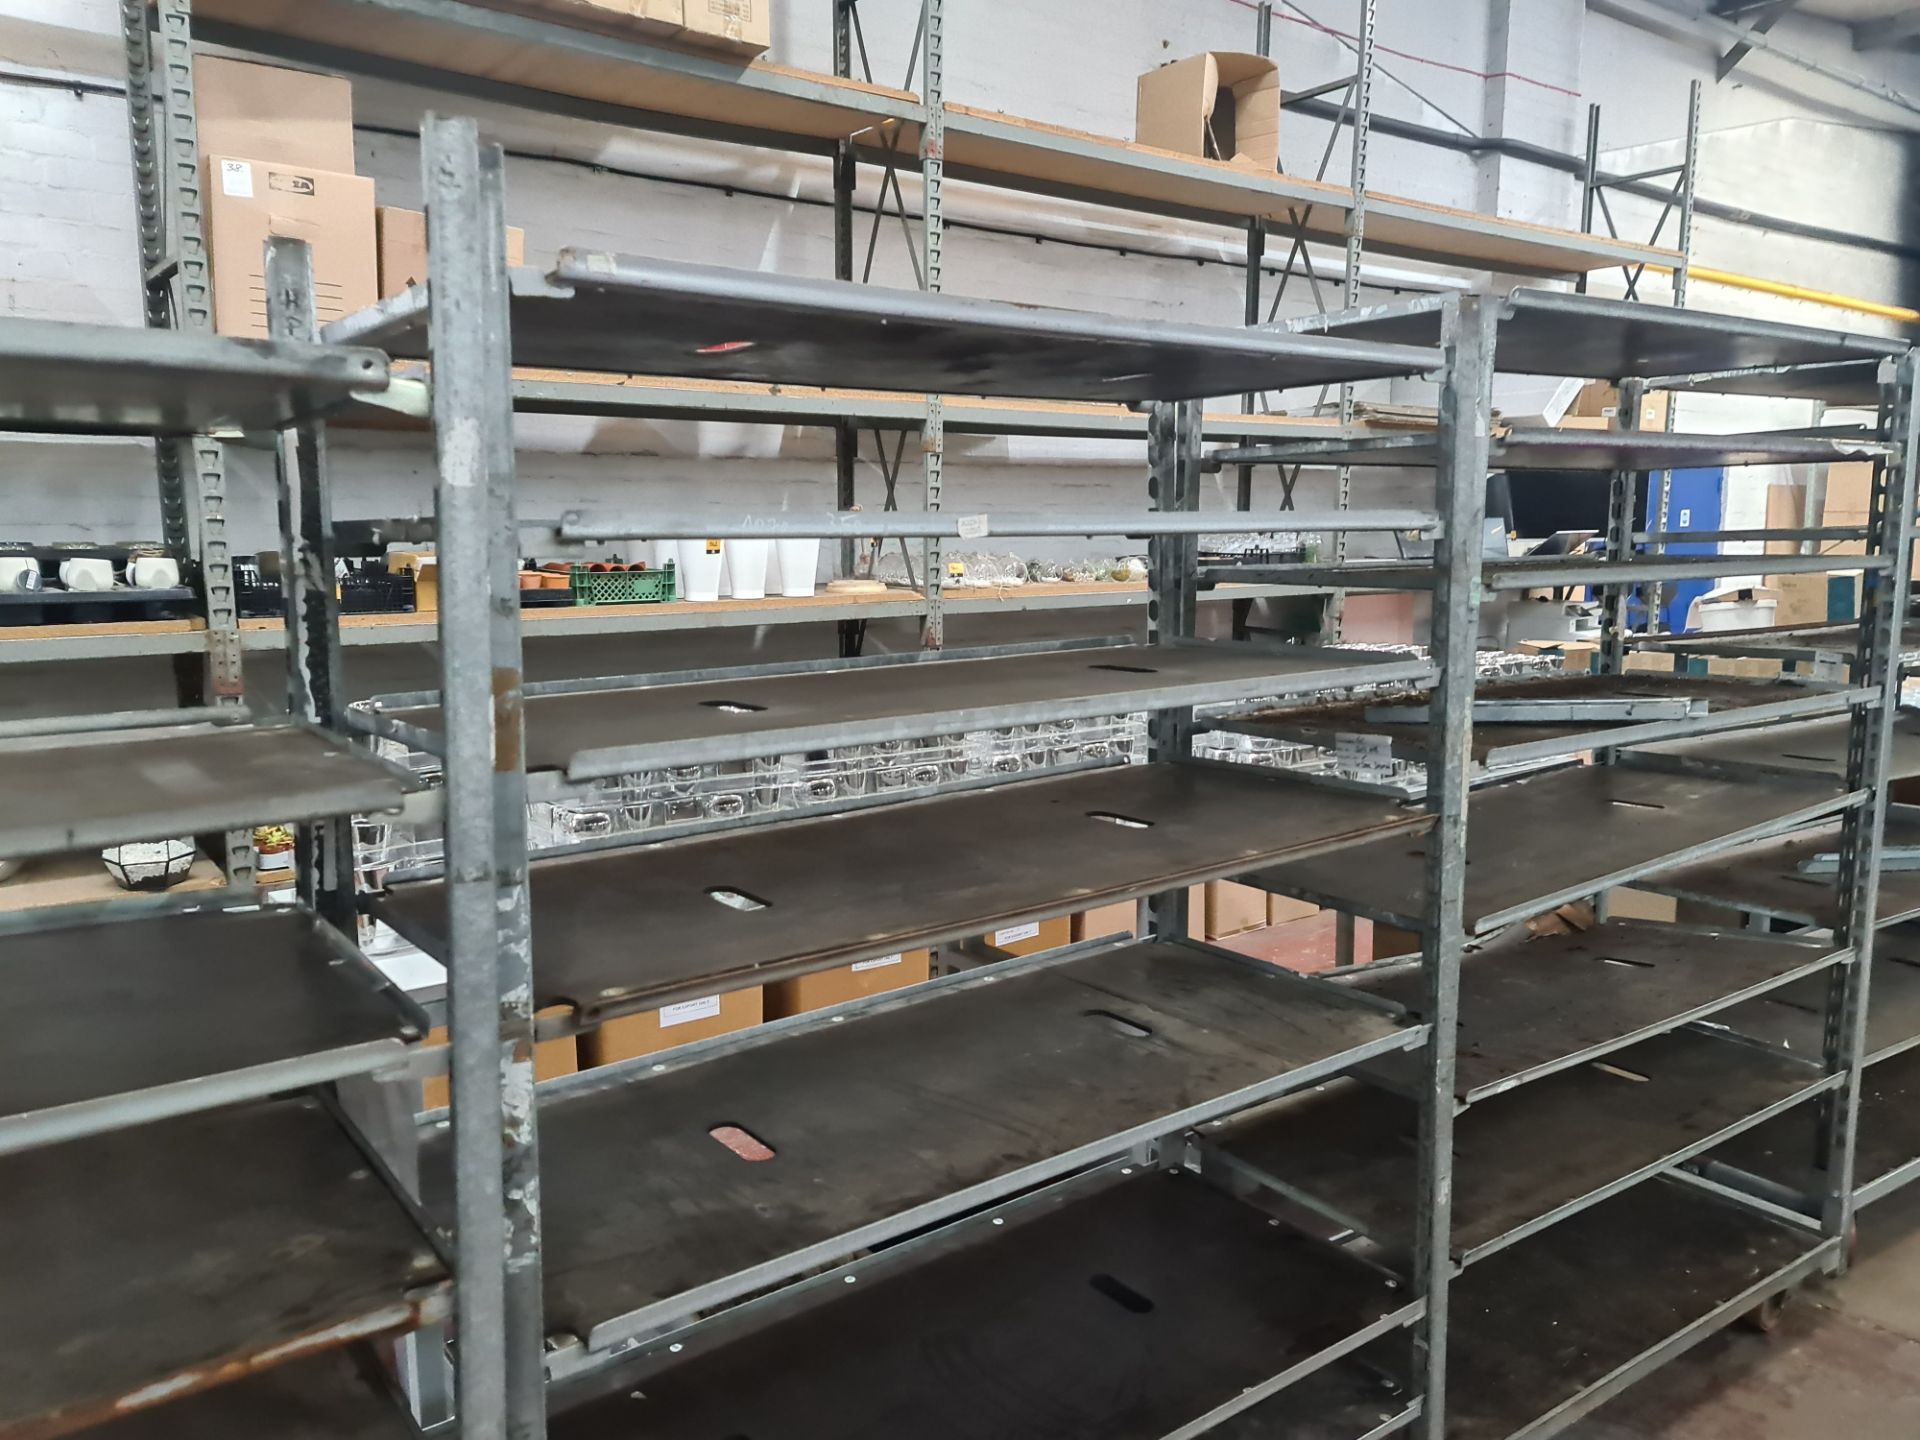 4 off large rectangular trollies with adjustable shelves for storing small plants - Image 10 of 13